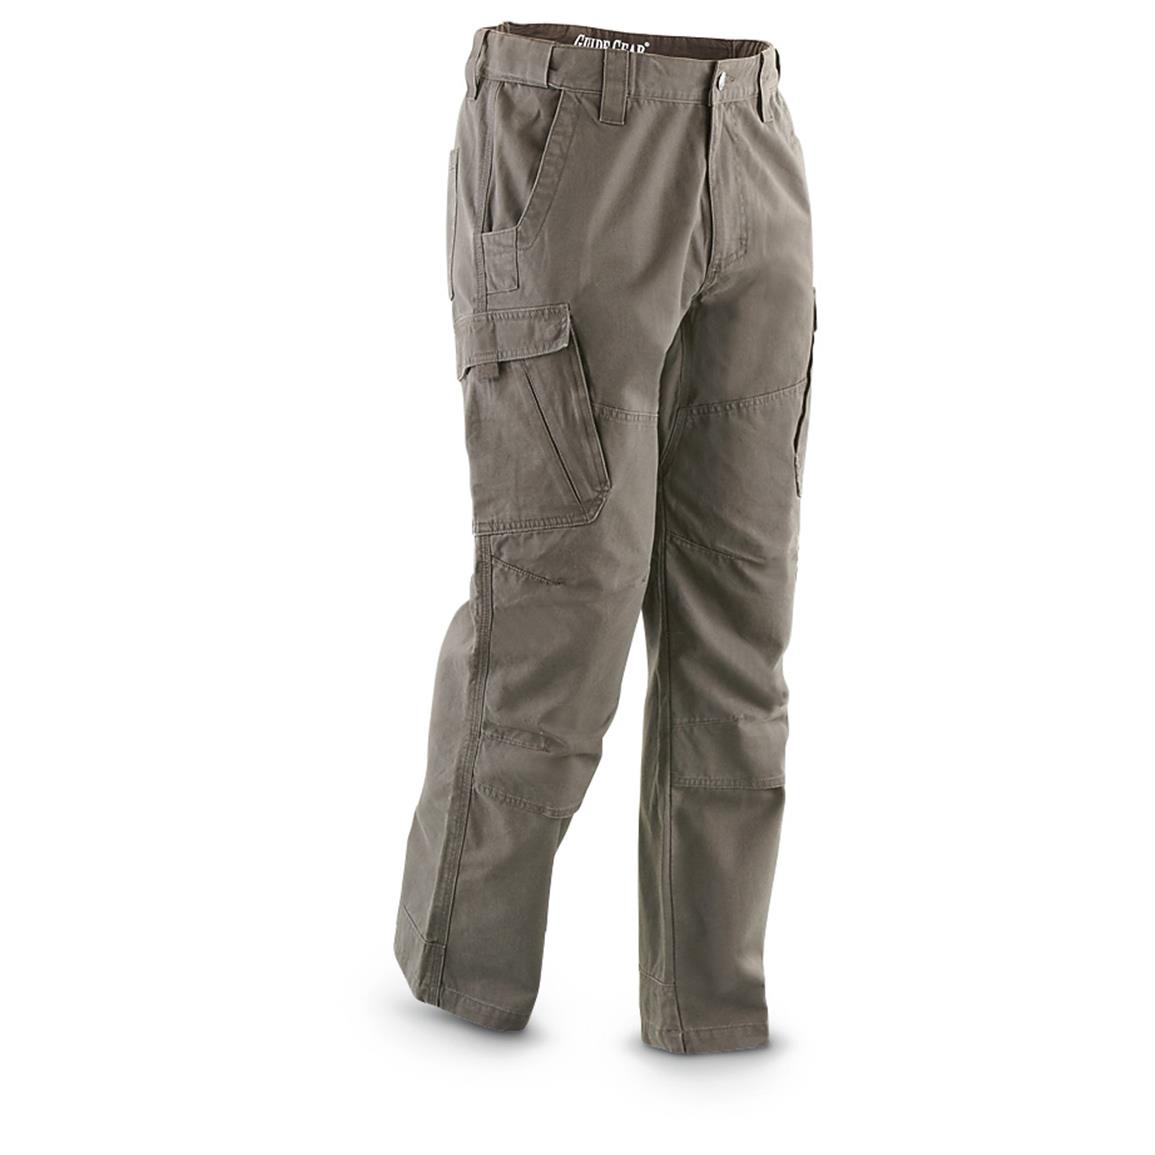 Guide Gear 9.5-oz. Canvas Work Pants - 581028, Jeans & Pants at ...